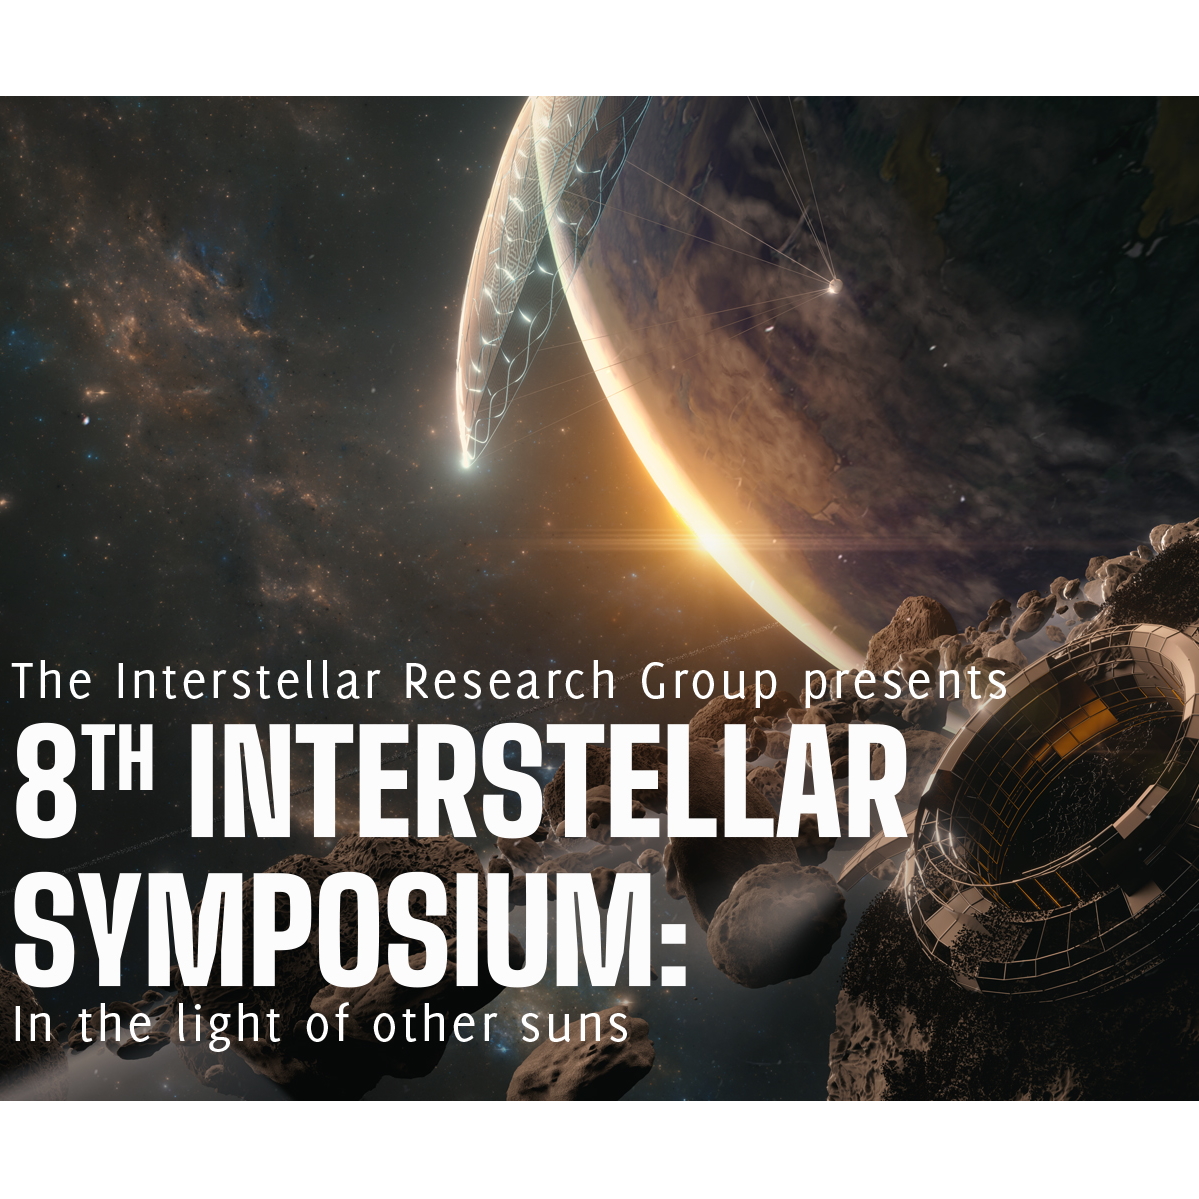 We're still looking for posters on #ethics #astrobiology #astrosociology #MaterialsScience #propulsion #SpaceTech for #IRG2023!

irg.space/irg-2023/